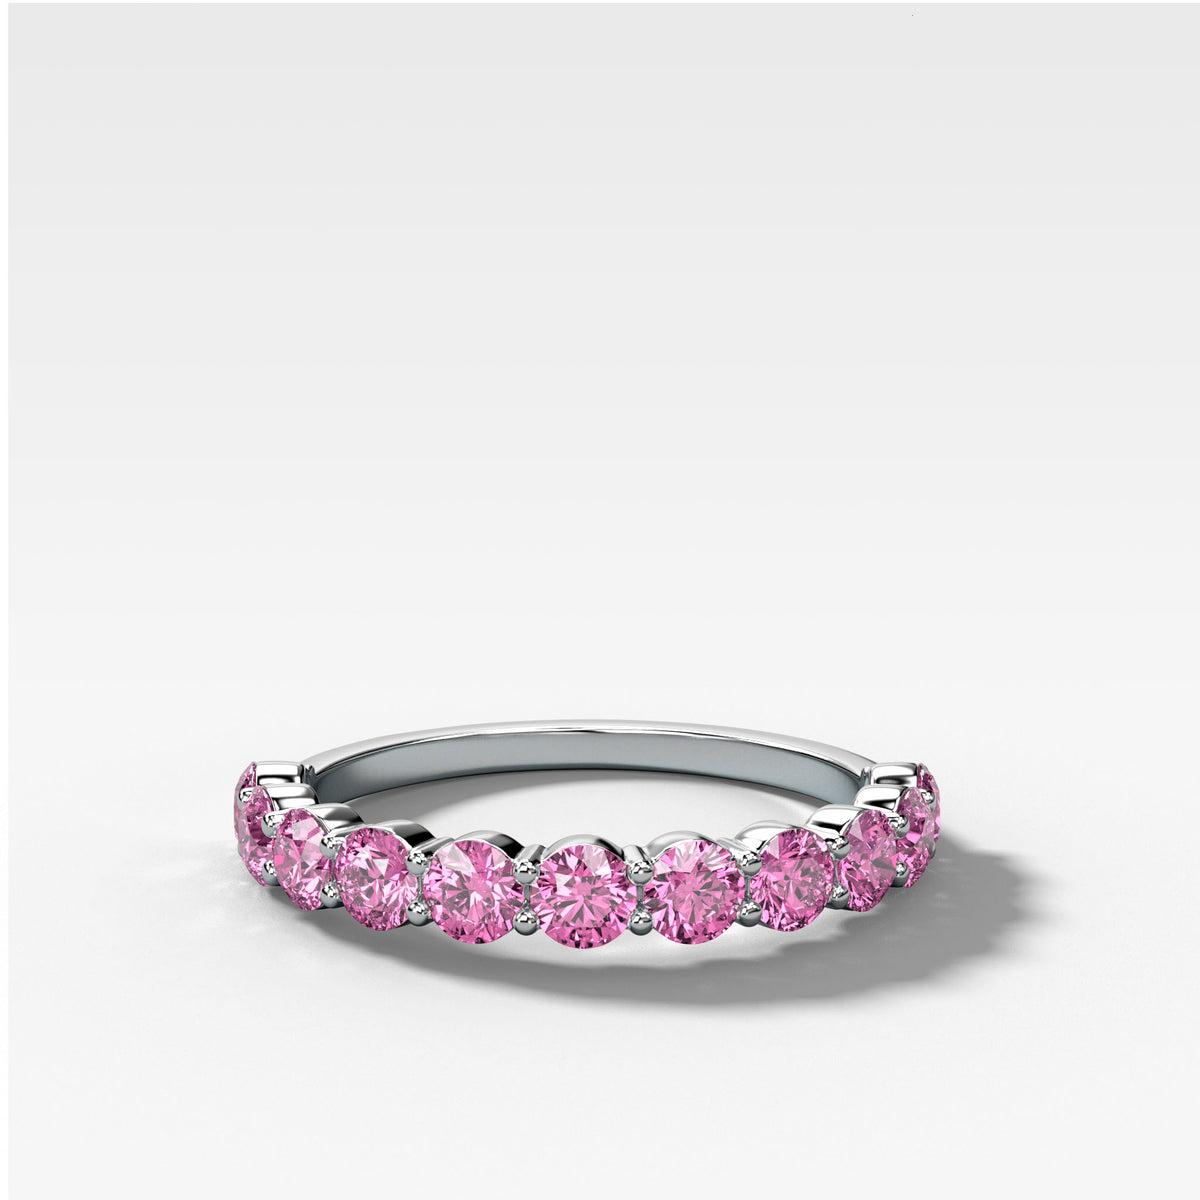 Shared Prong Wedding Band With Pink Sapphires